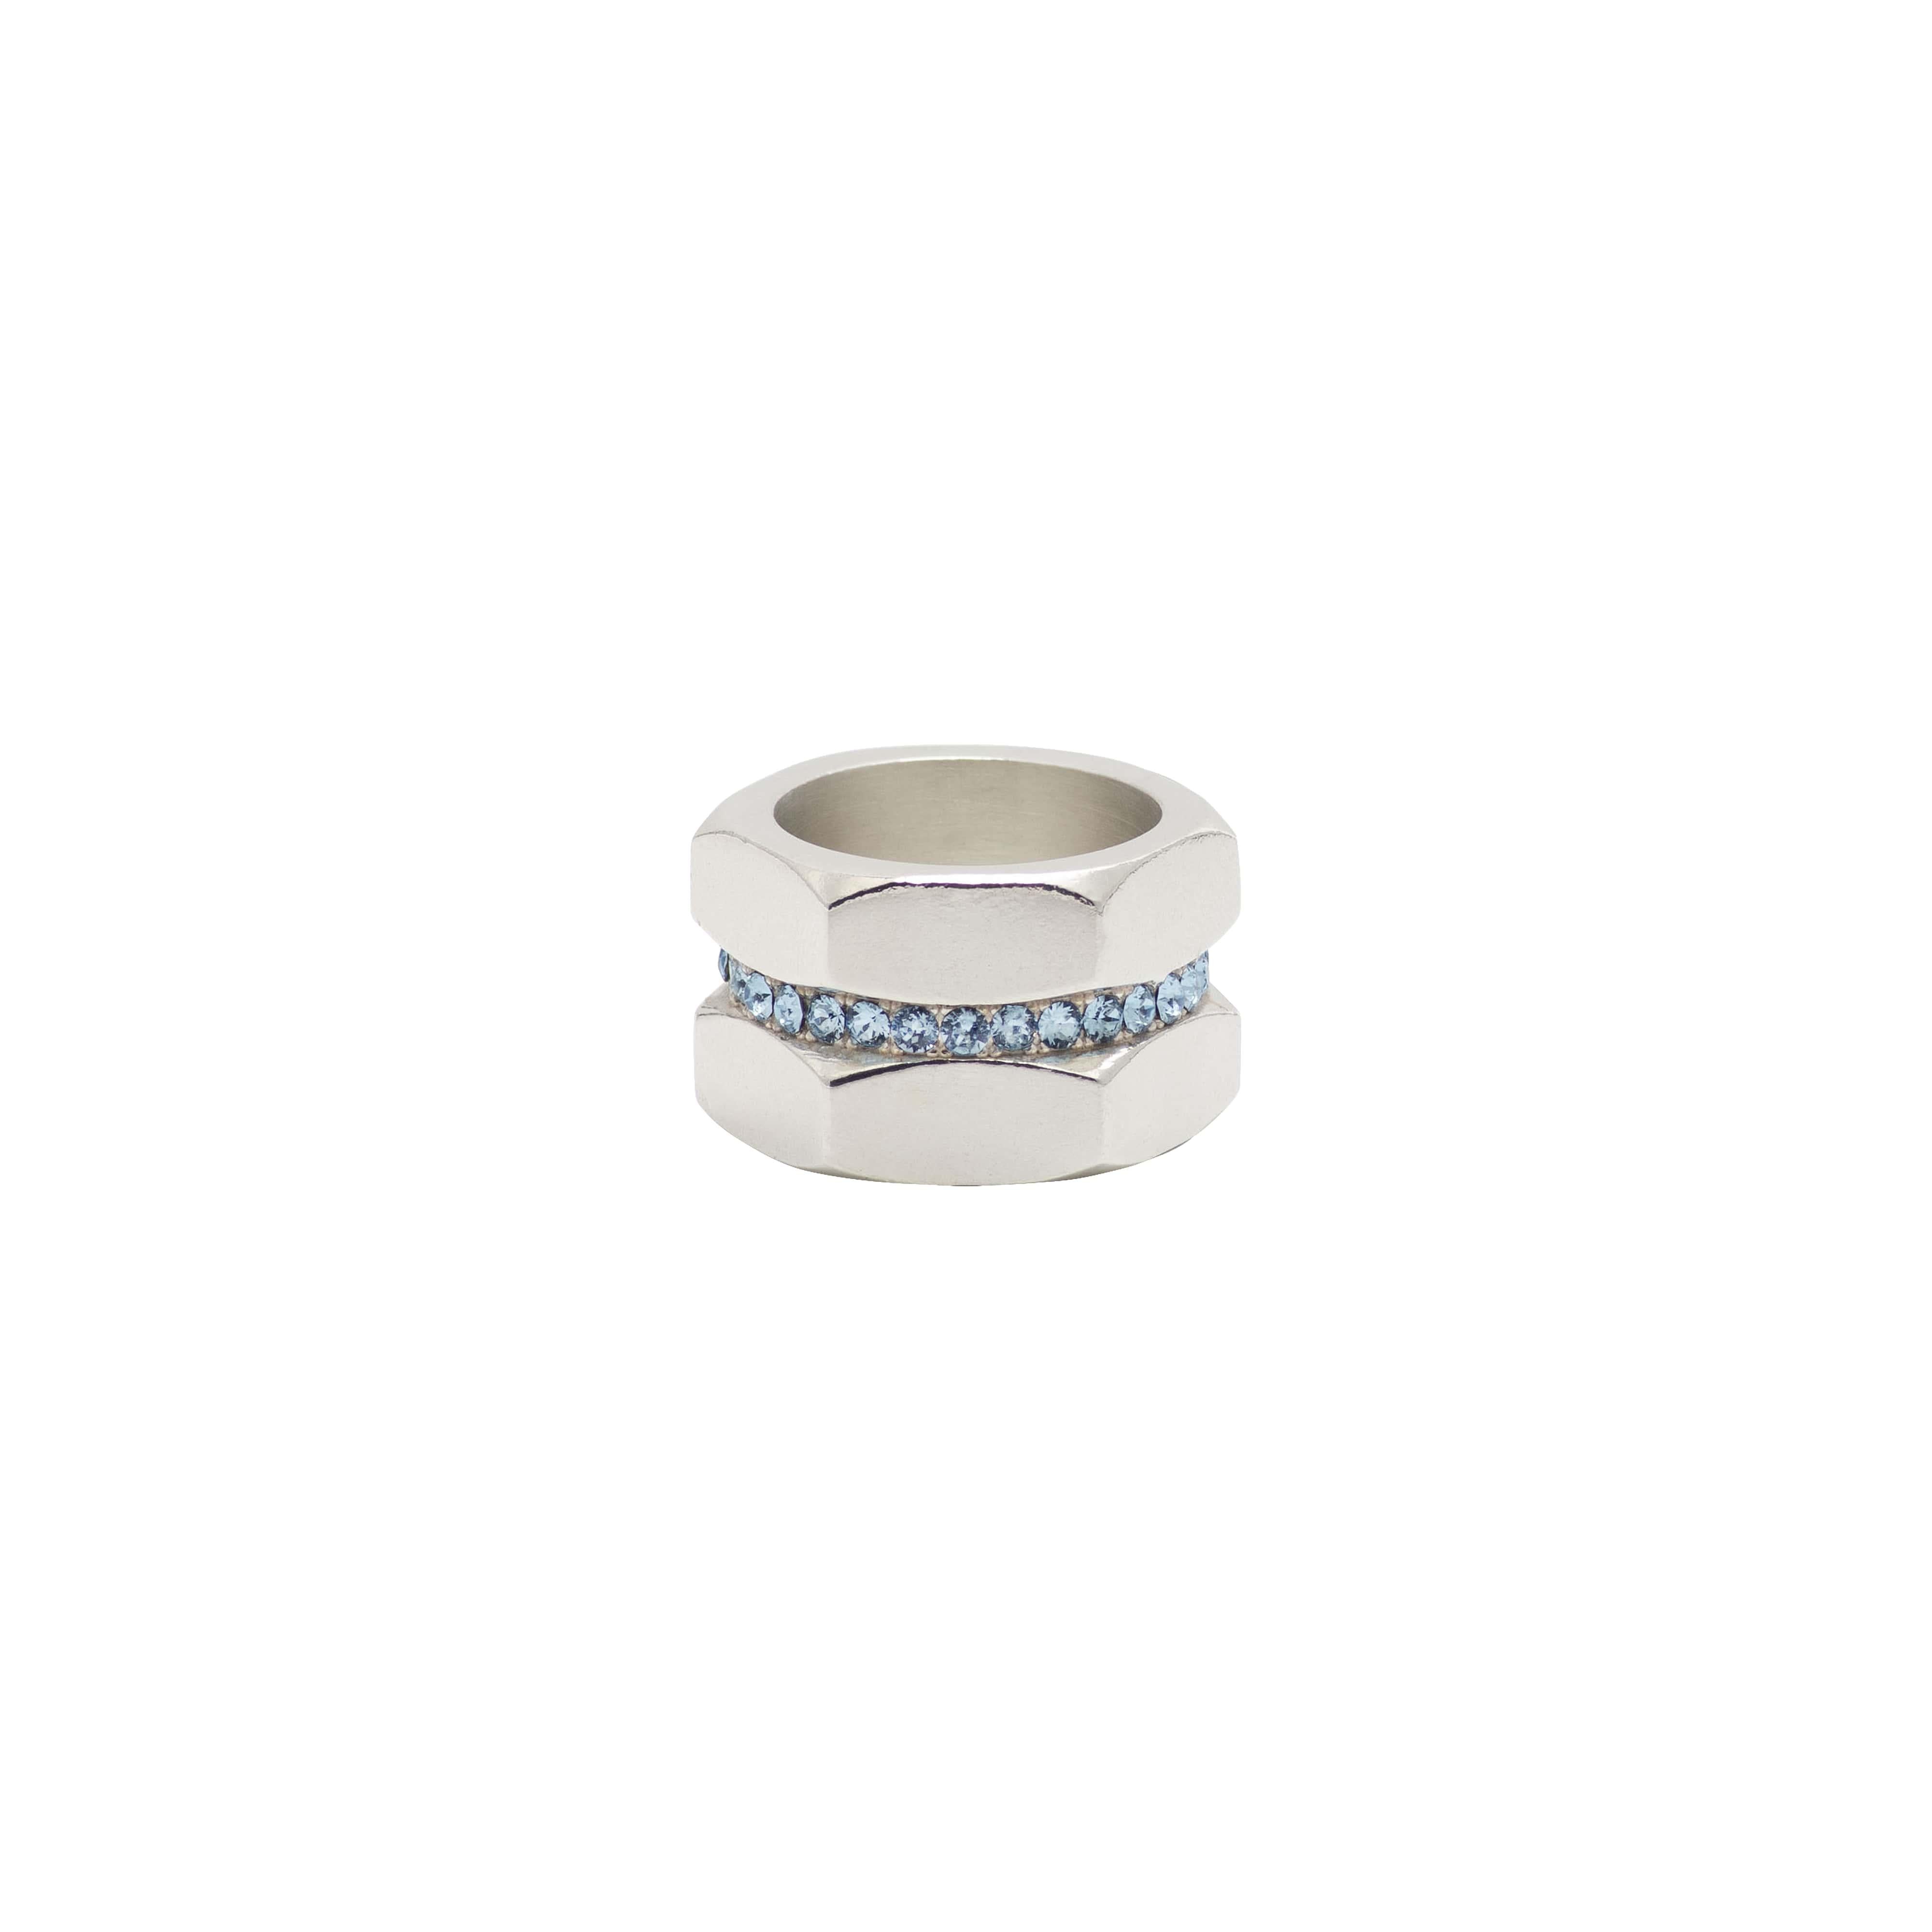 For Sale:  Big Solid Sterling Silver Ring with Aquamarine Zirconia Stones 2